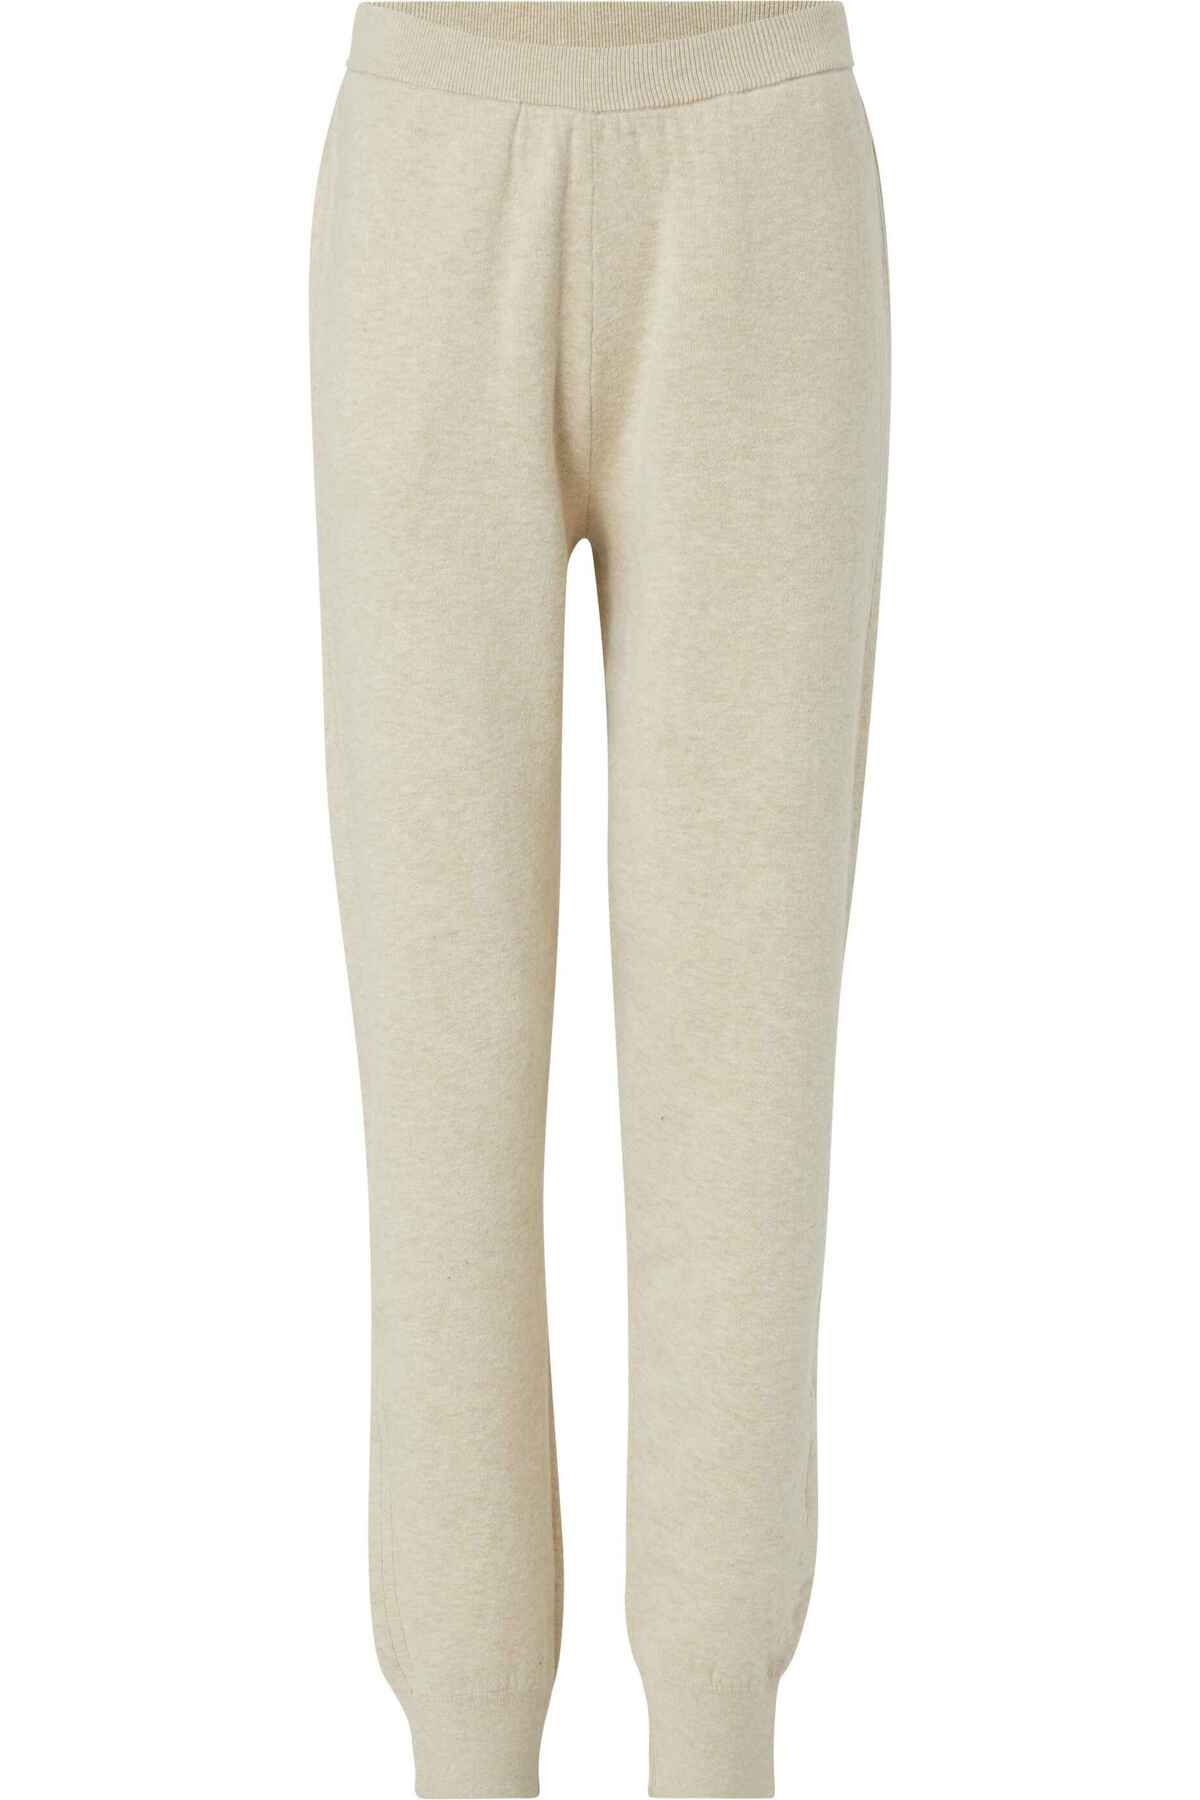 Calvin Klein COTTON CASHMERE TAPERED PANT